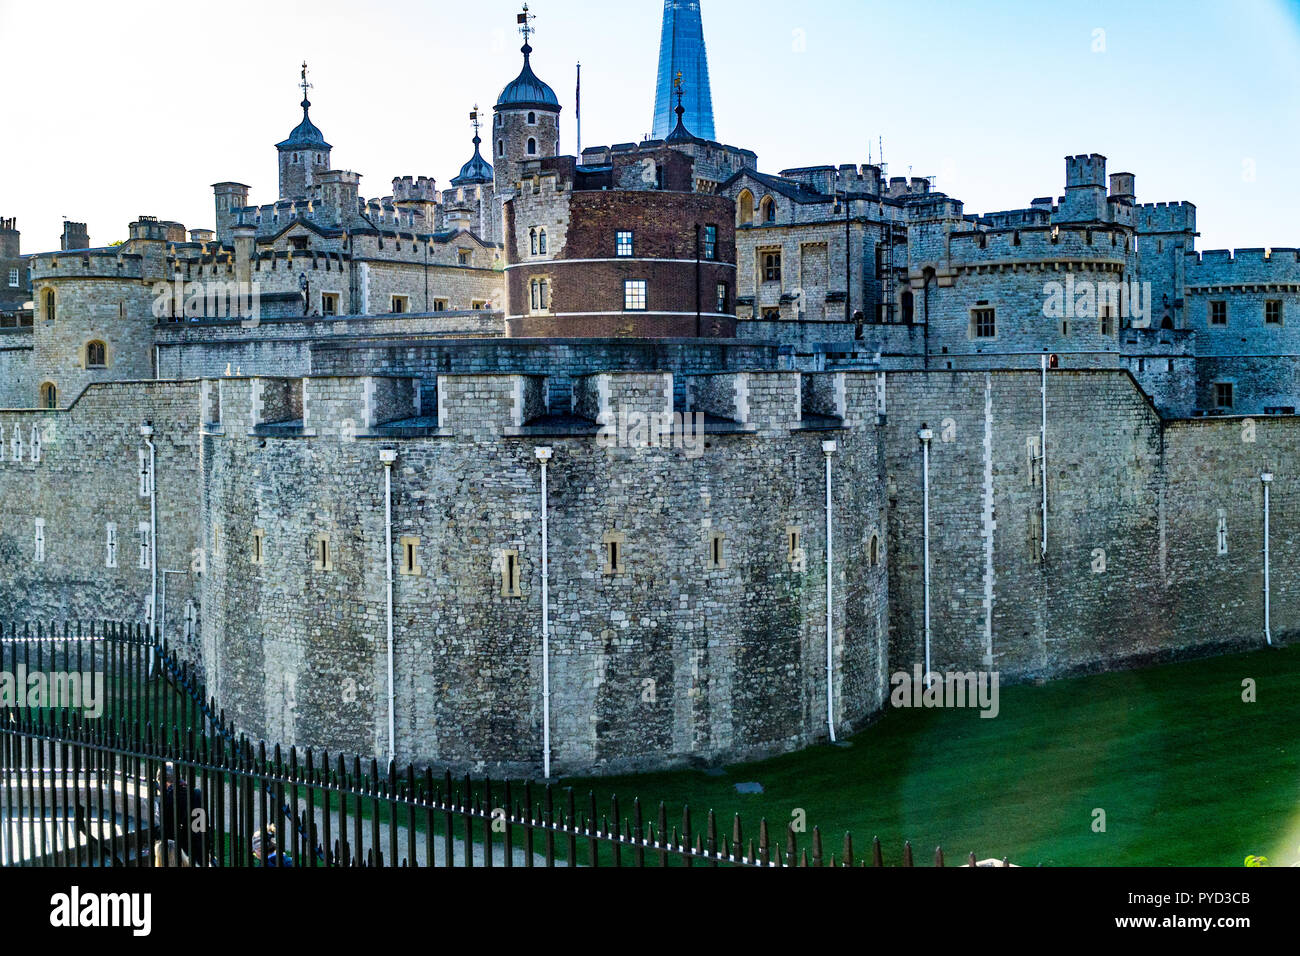 The Tower of Londin in London England Stock Photo